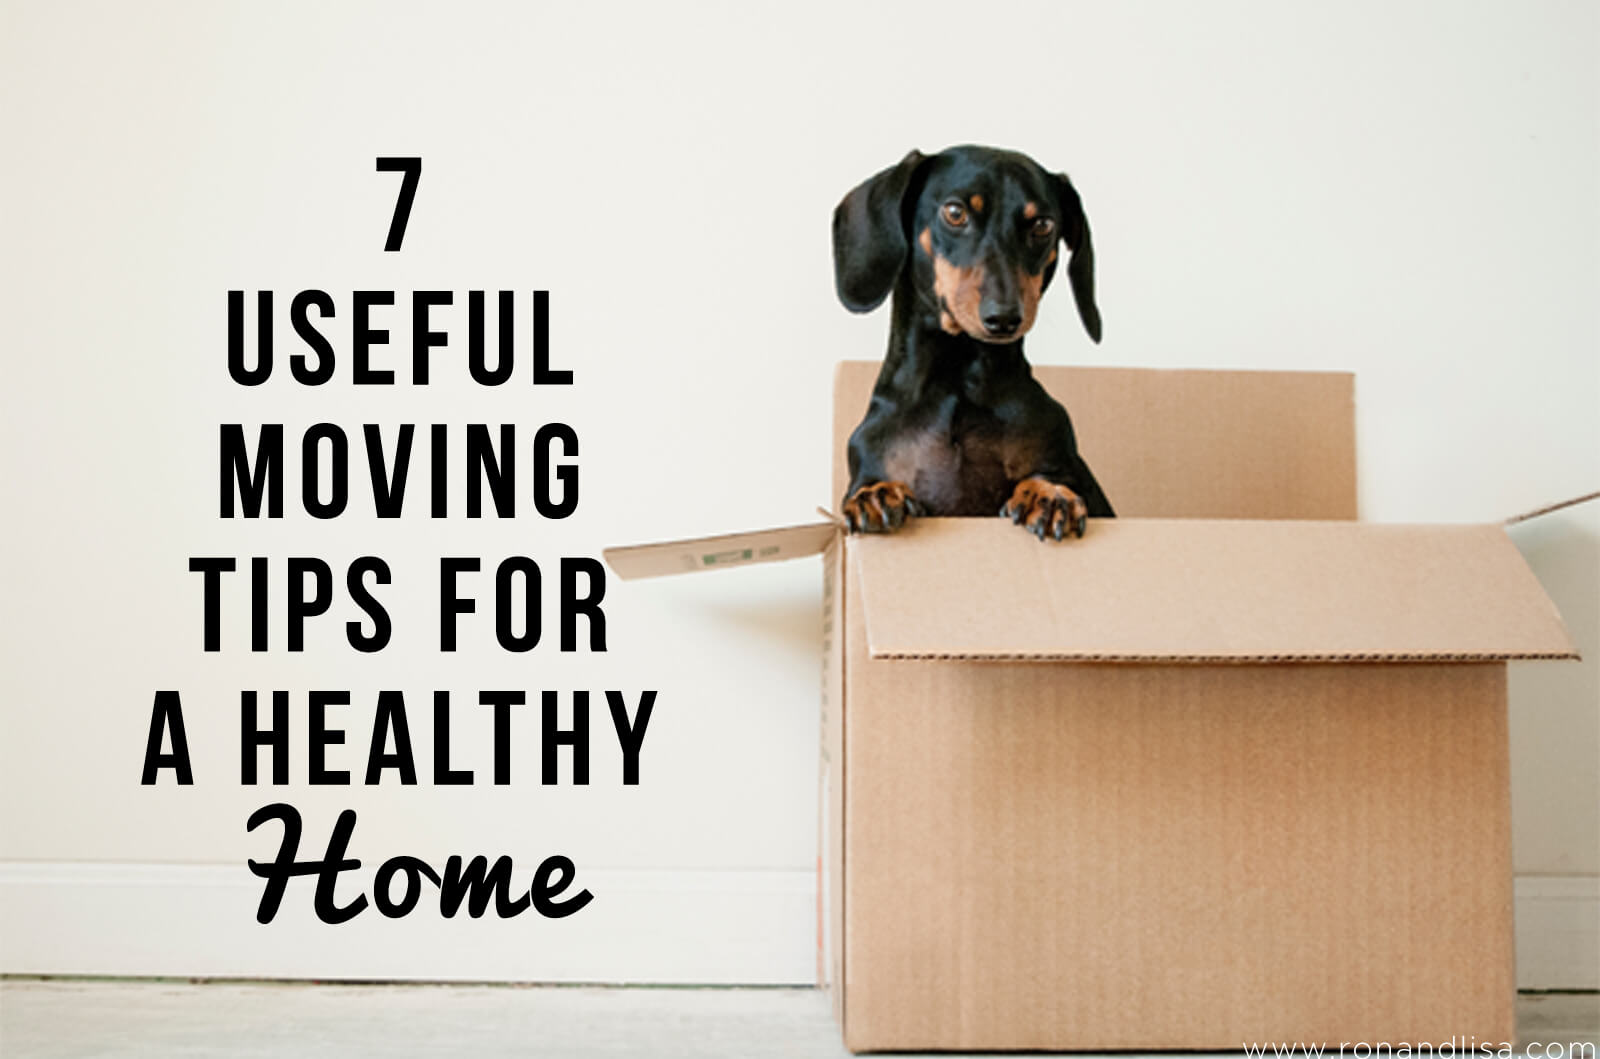 7 Useful Moving Tips For A Healthy Home